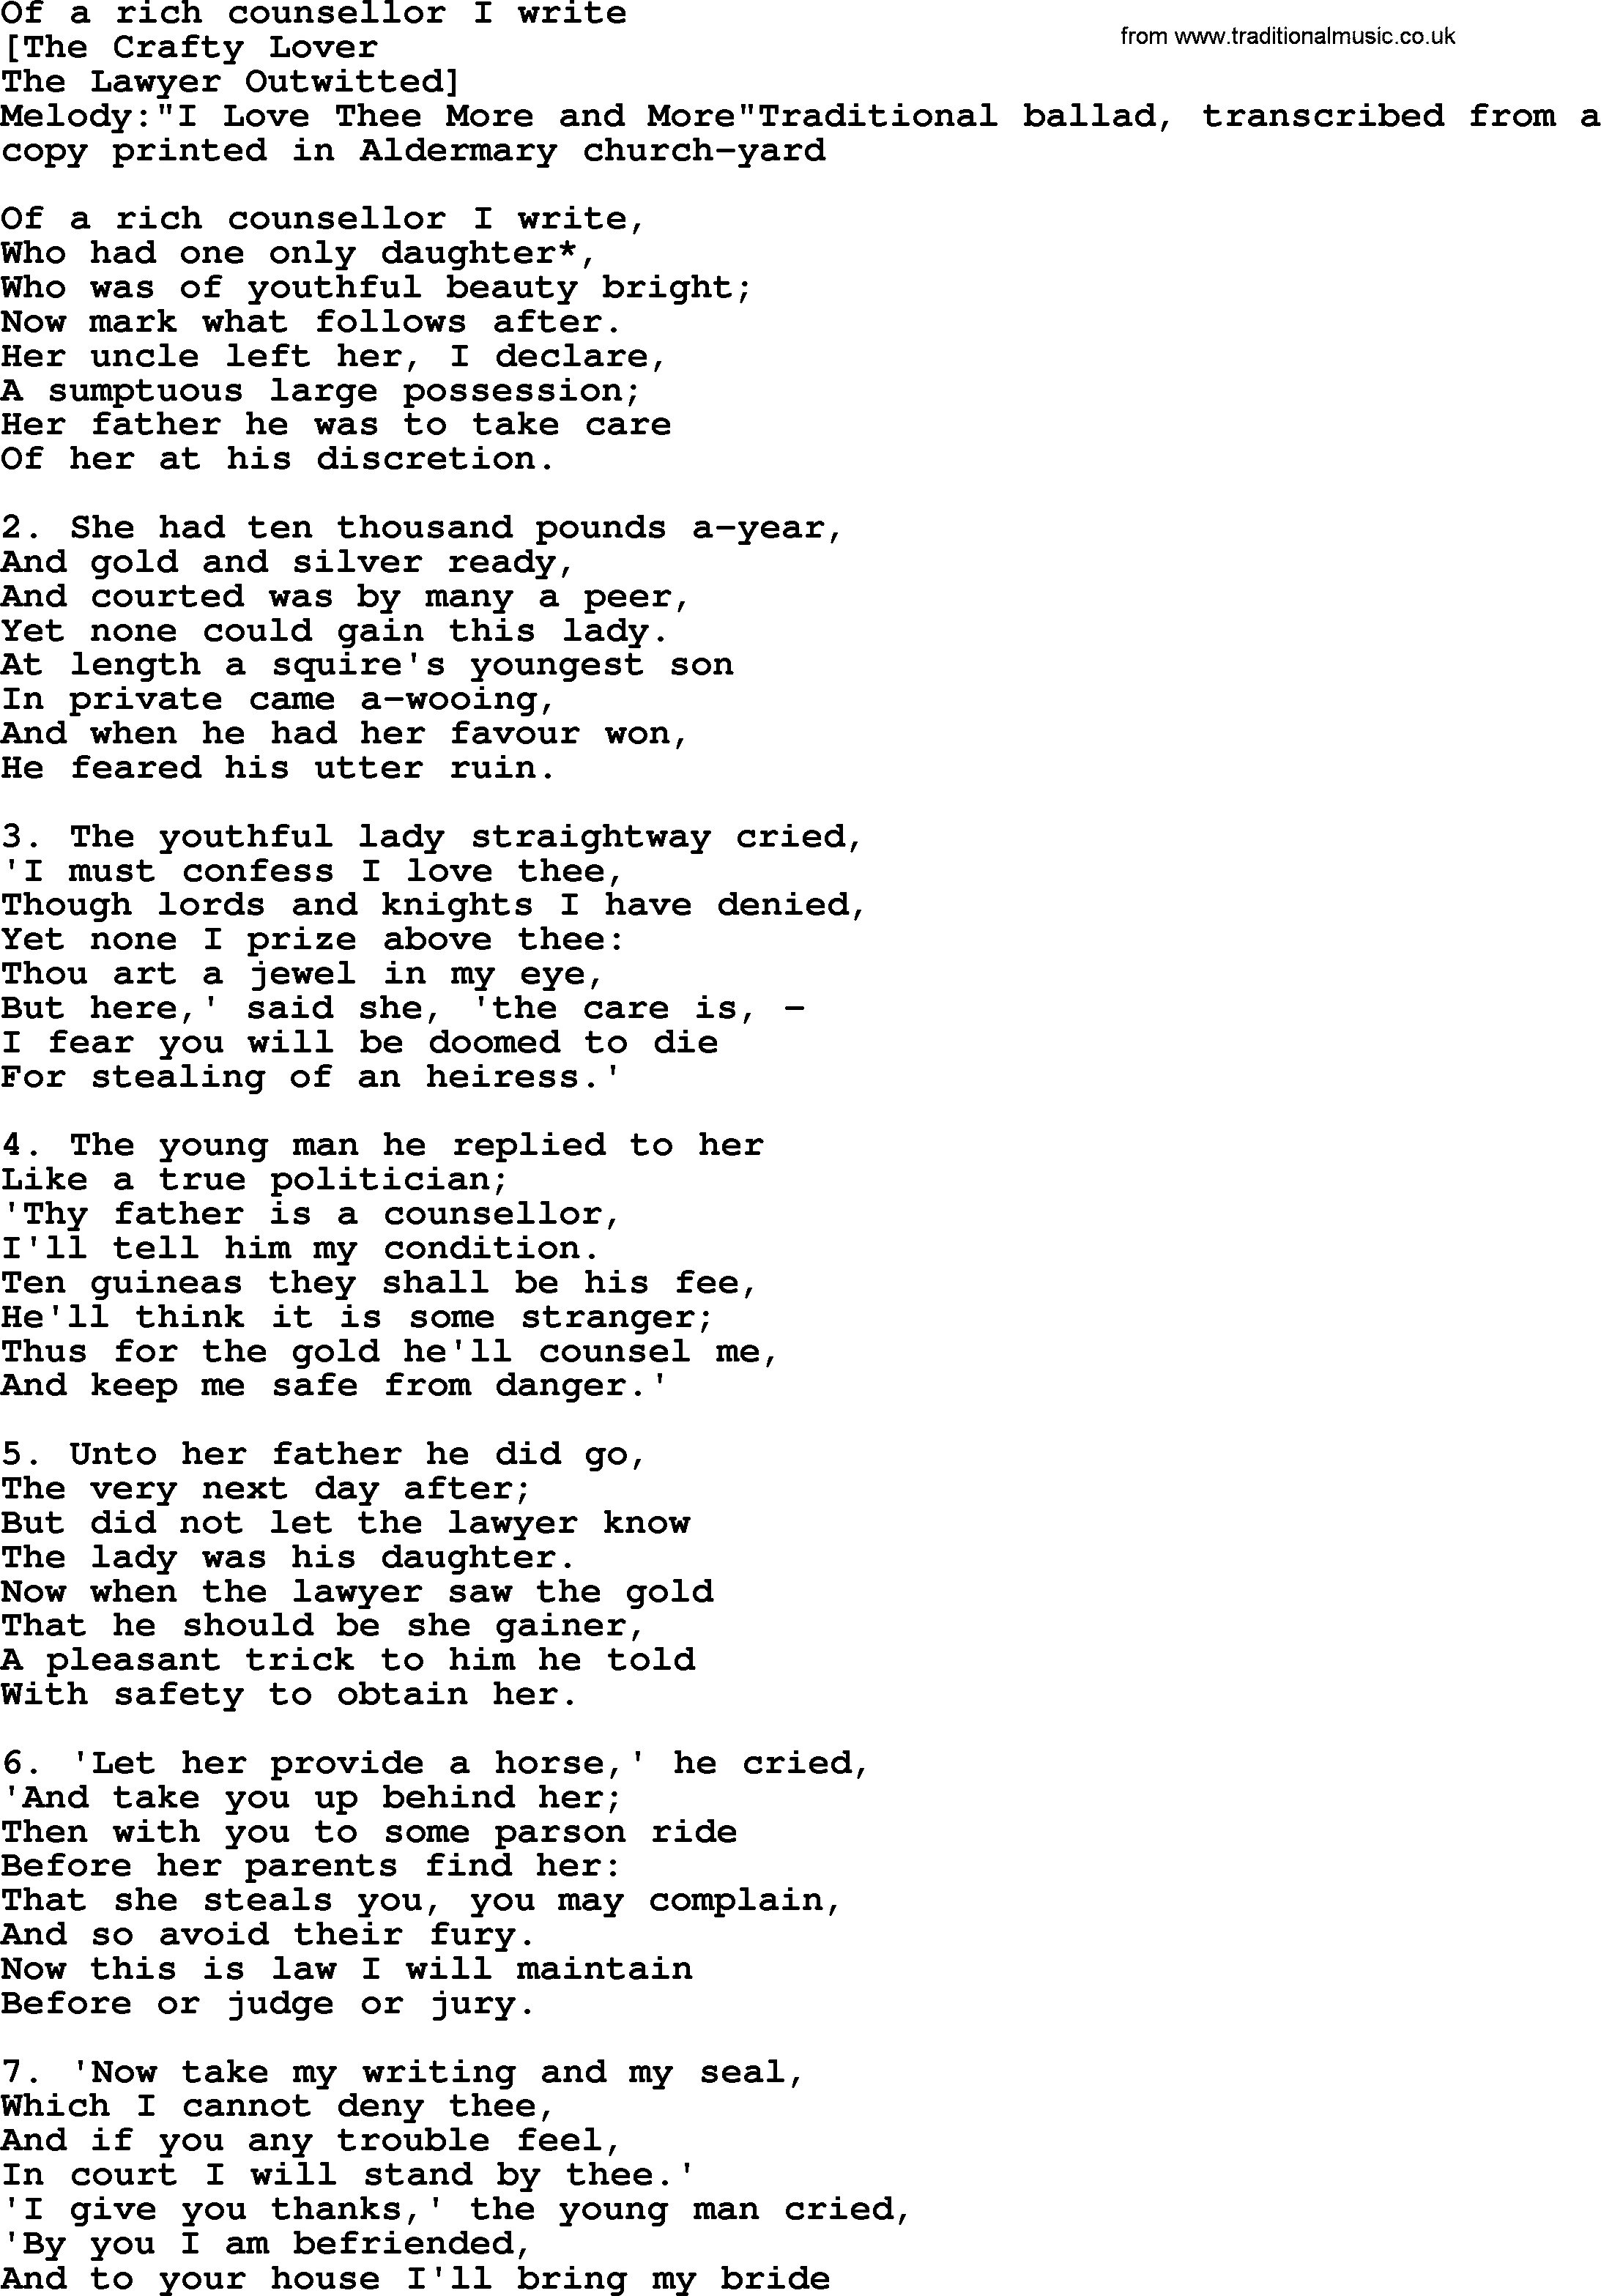 Old English Song: Of A Rich Counsellor I Write lyrics